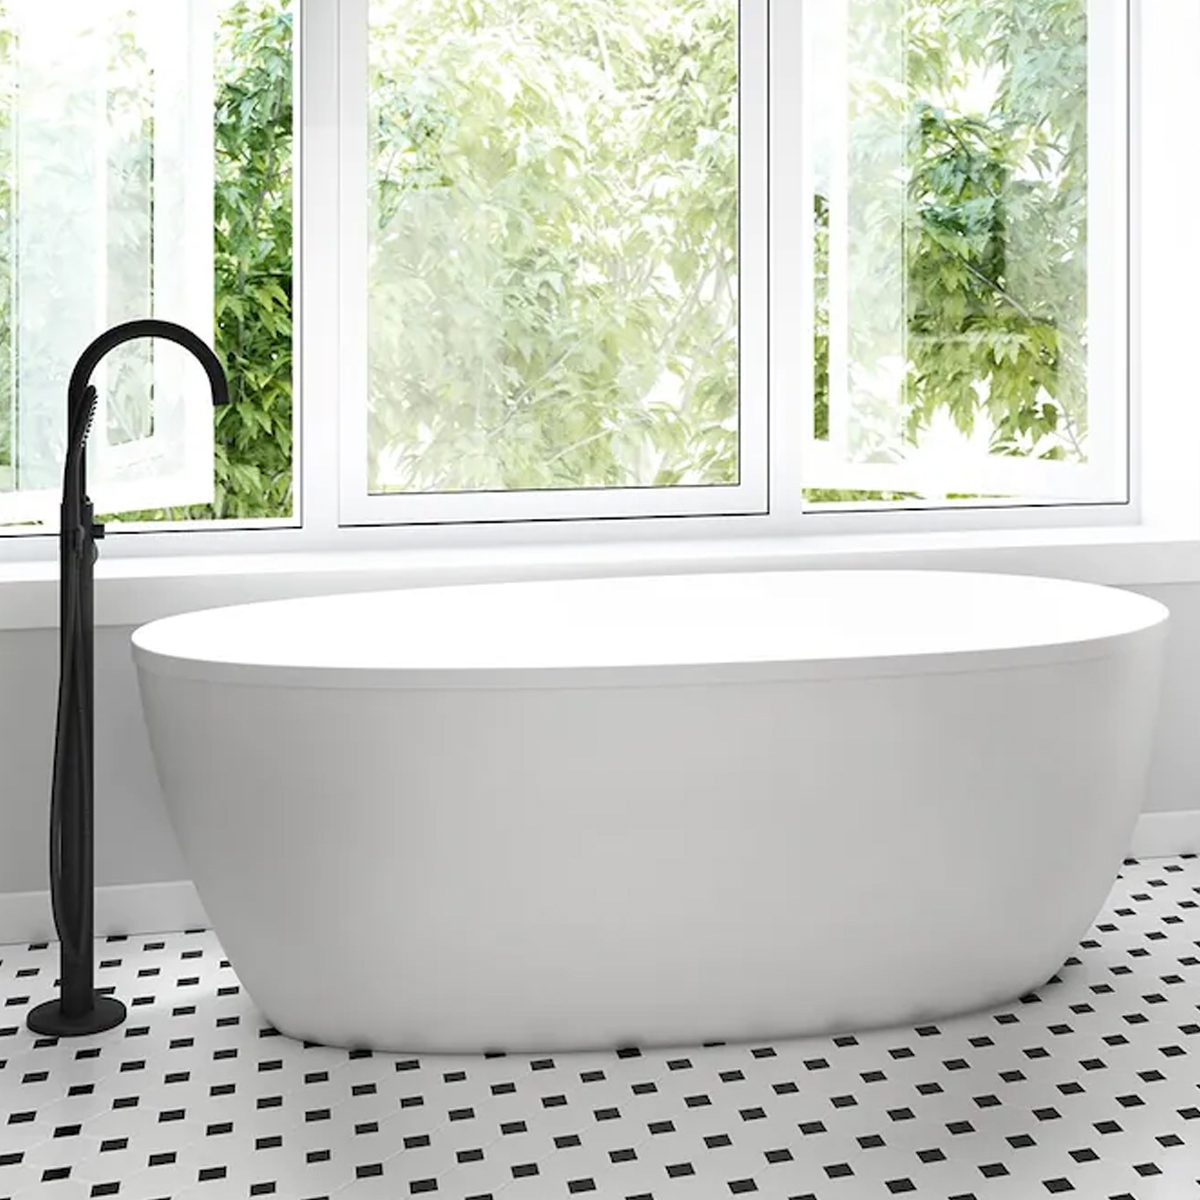 5 Best Spa And Jacuzzi Bathtubs For, How To Choose A Whirlpool Bathtub